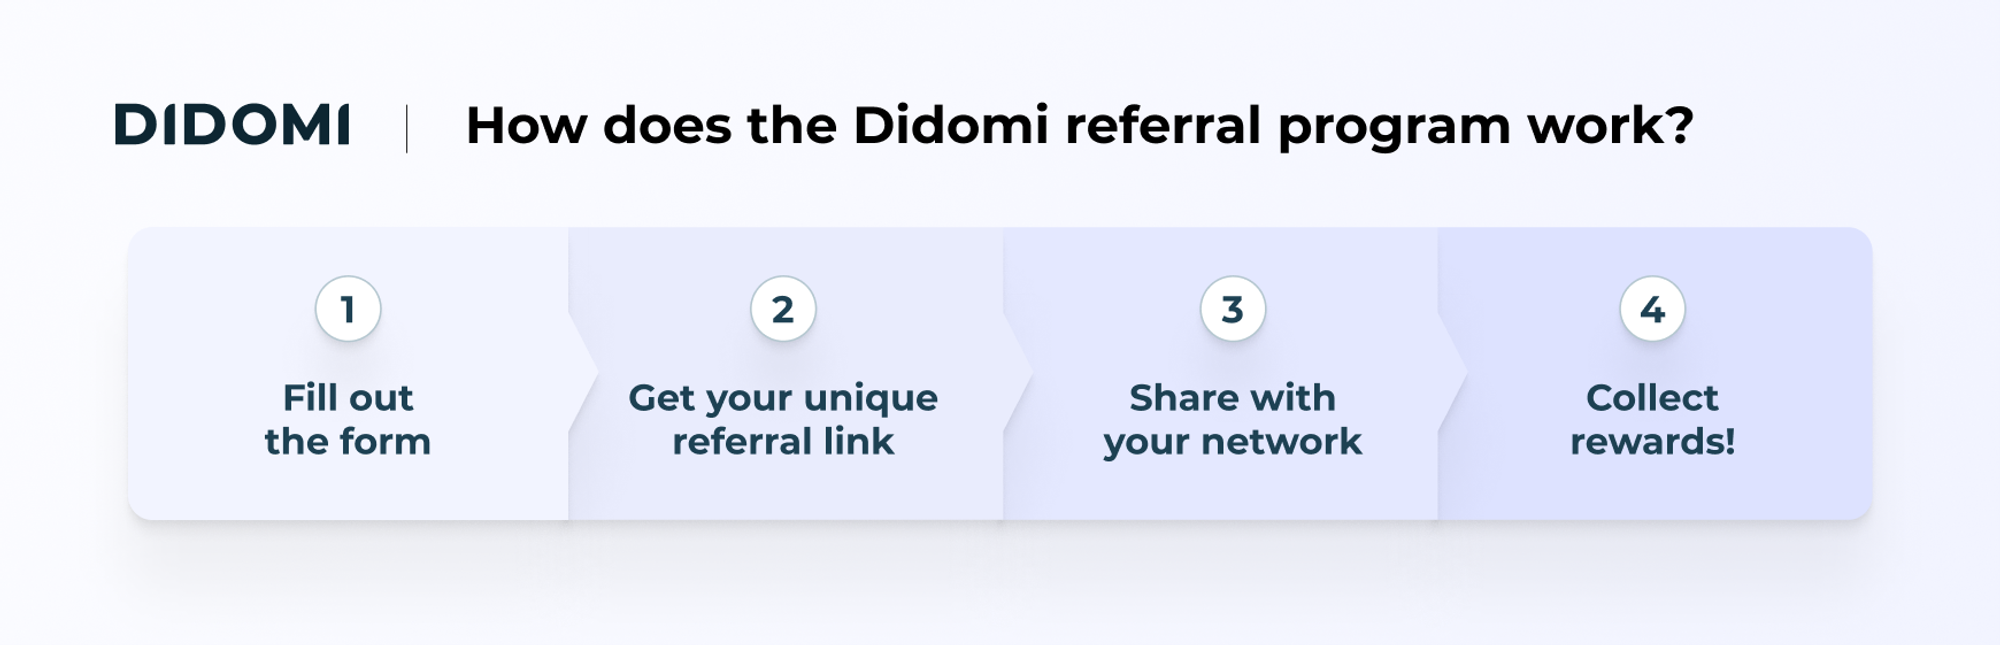 Didomi - how does the referal program work